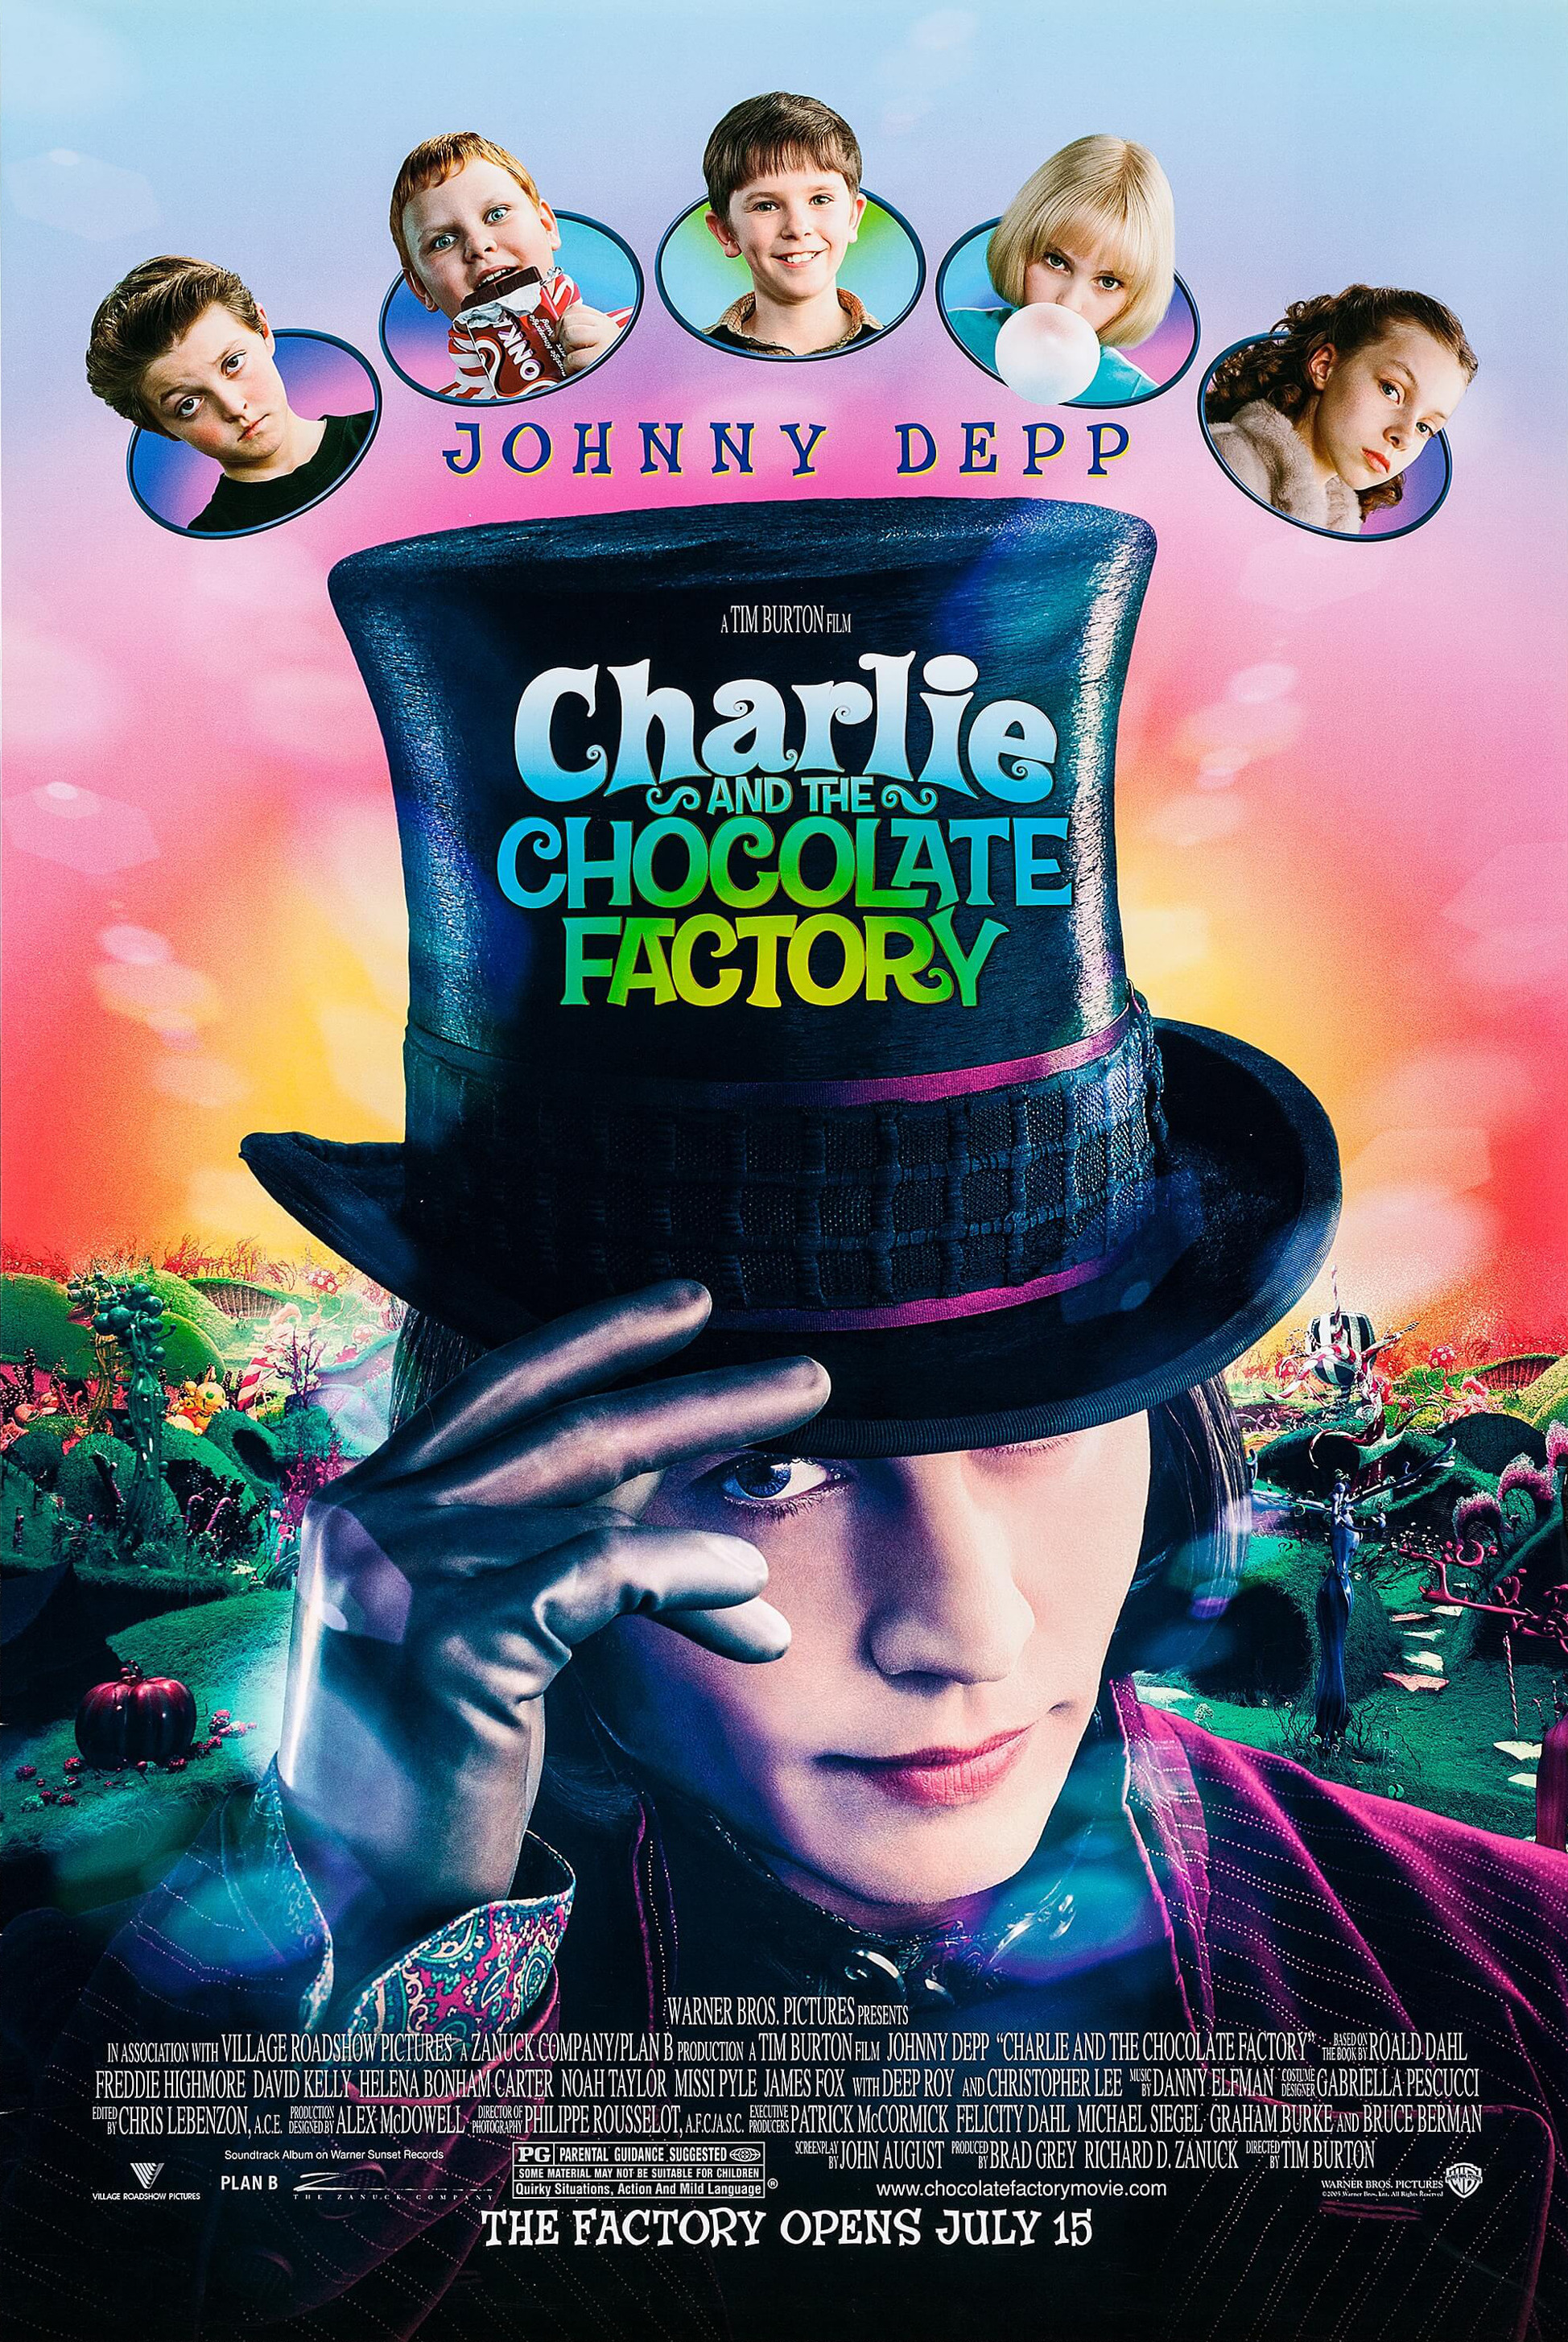 Charlie and the Chocolate Factory (film) Warner Bros image